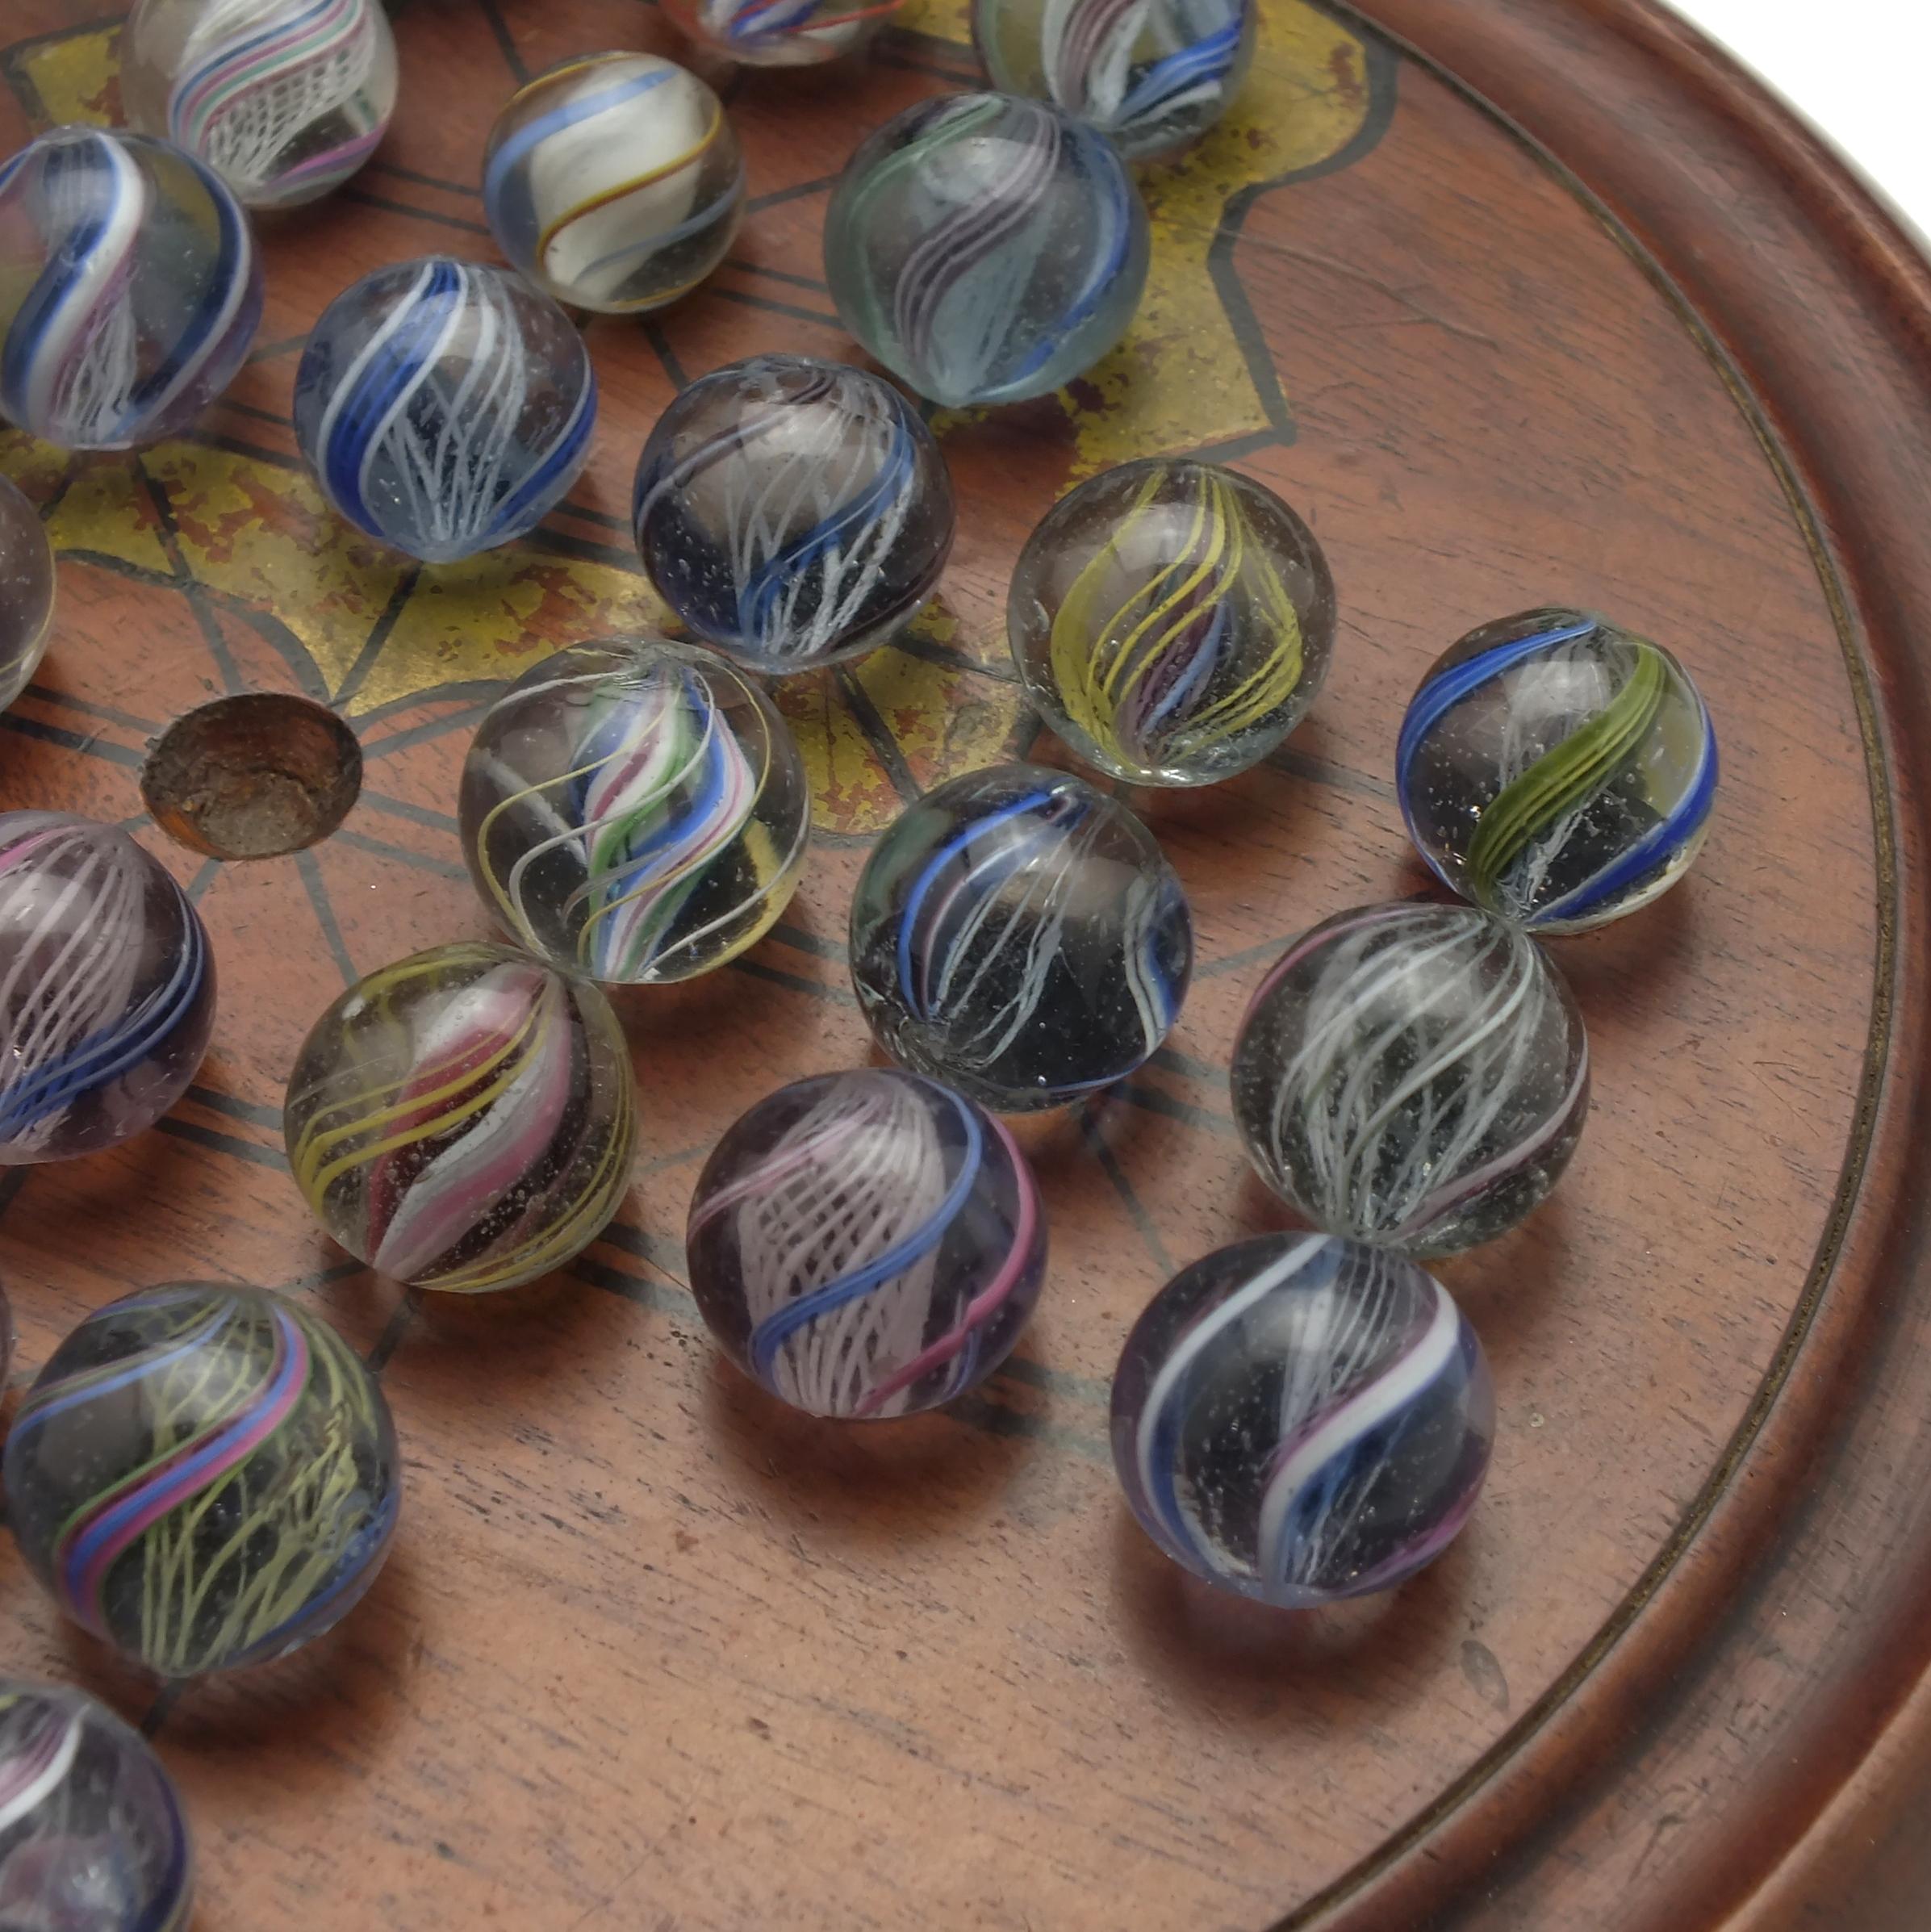 Glass Antique Solitaire Board and 19th Century German Marbles, circa 1870